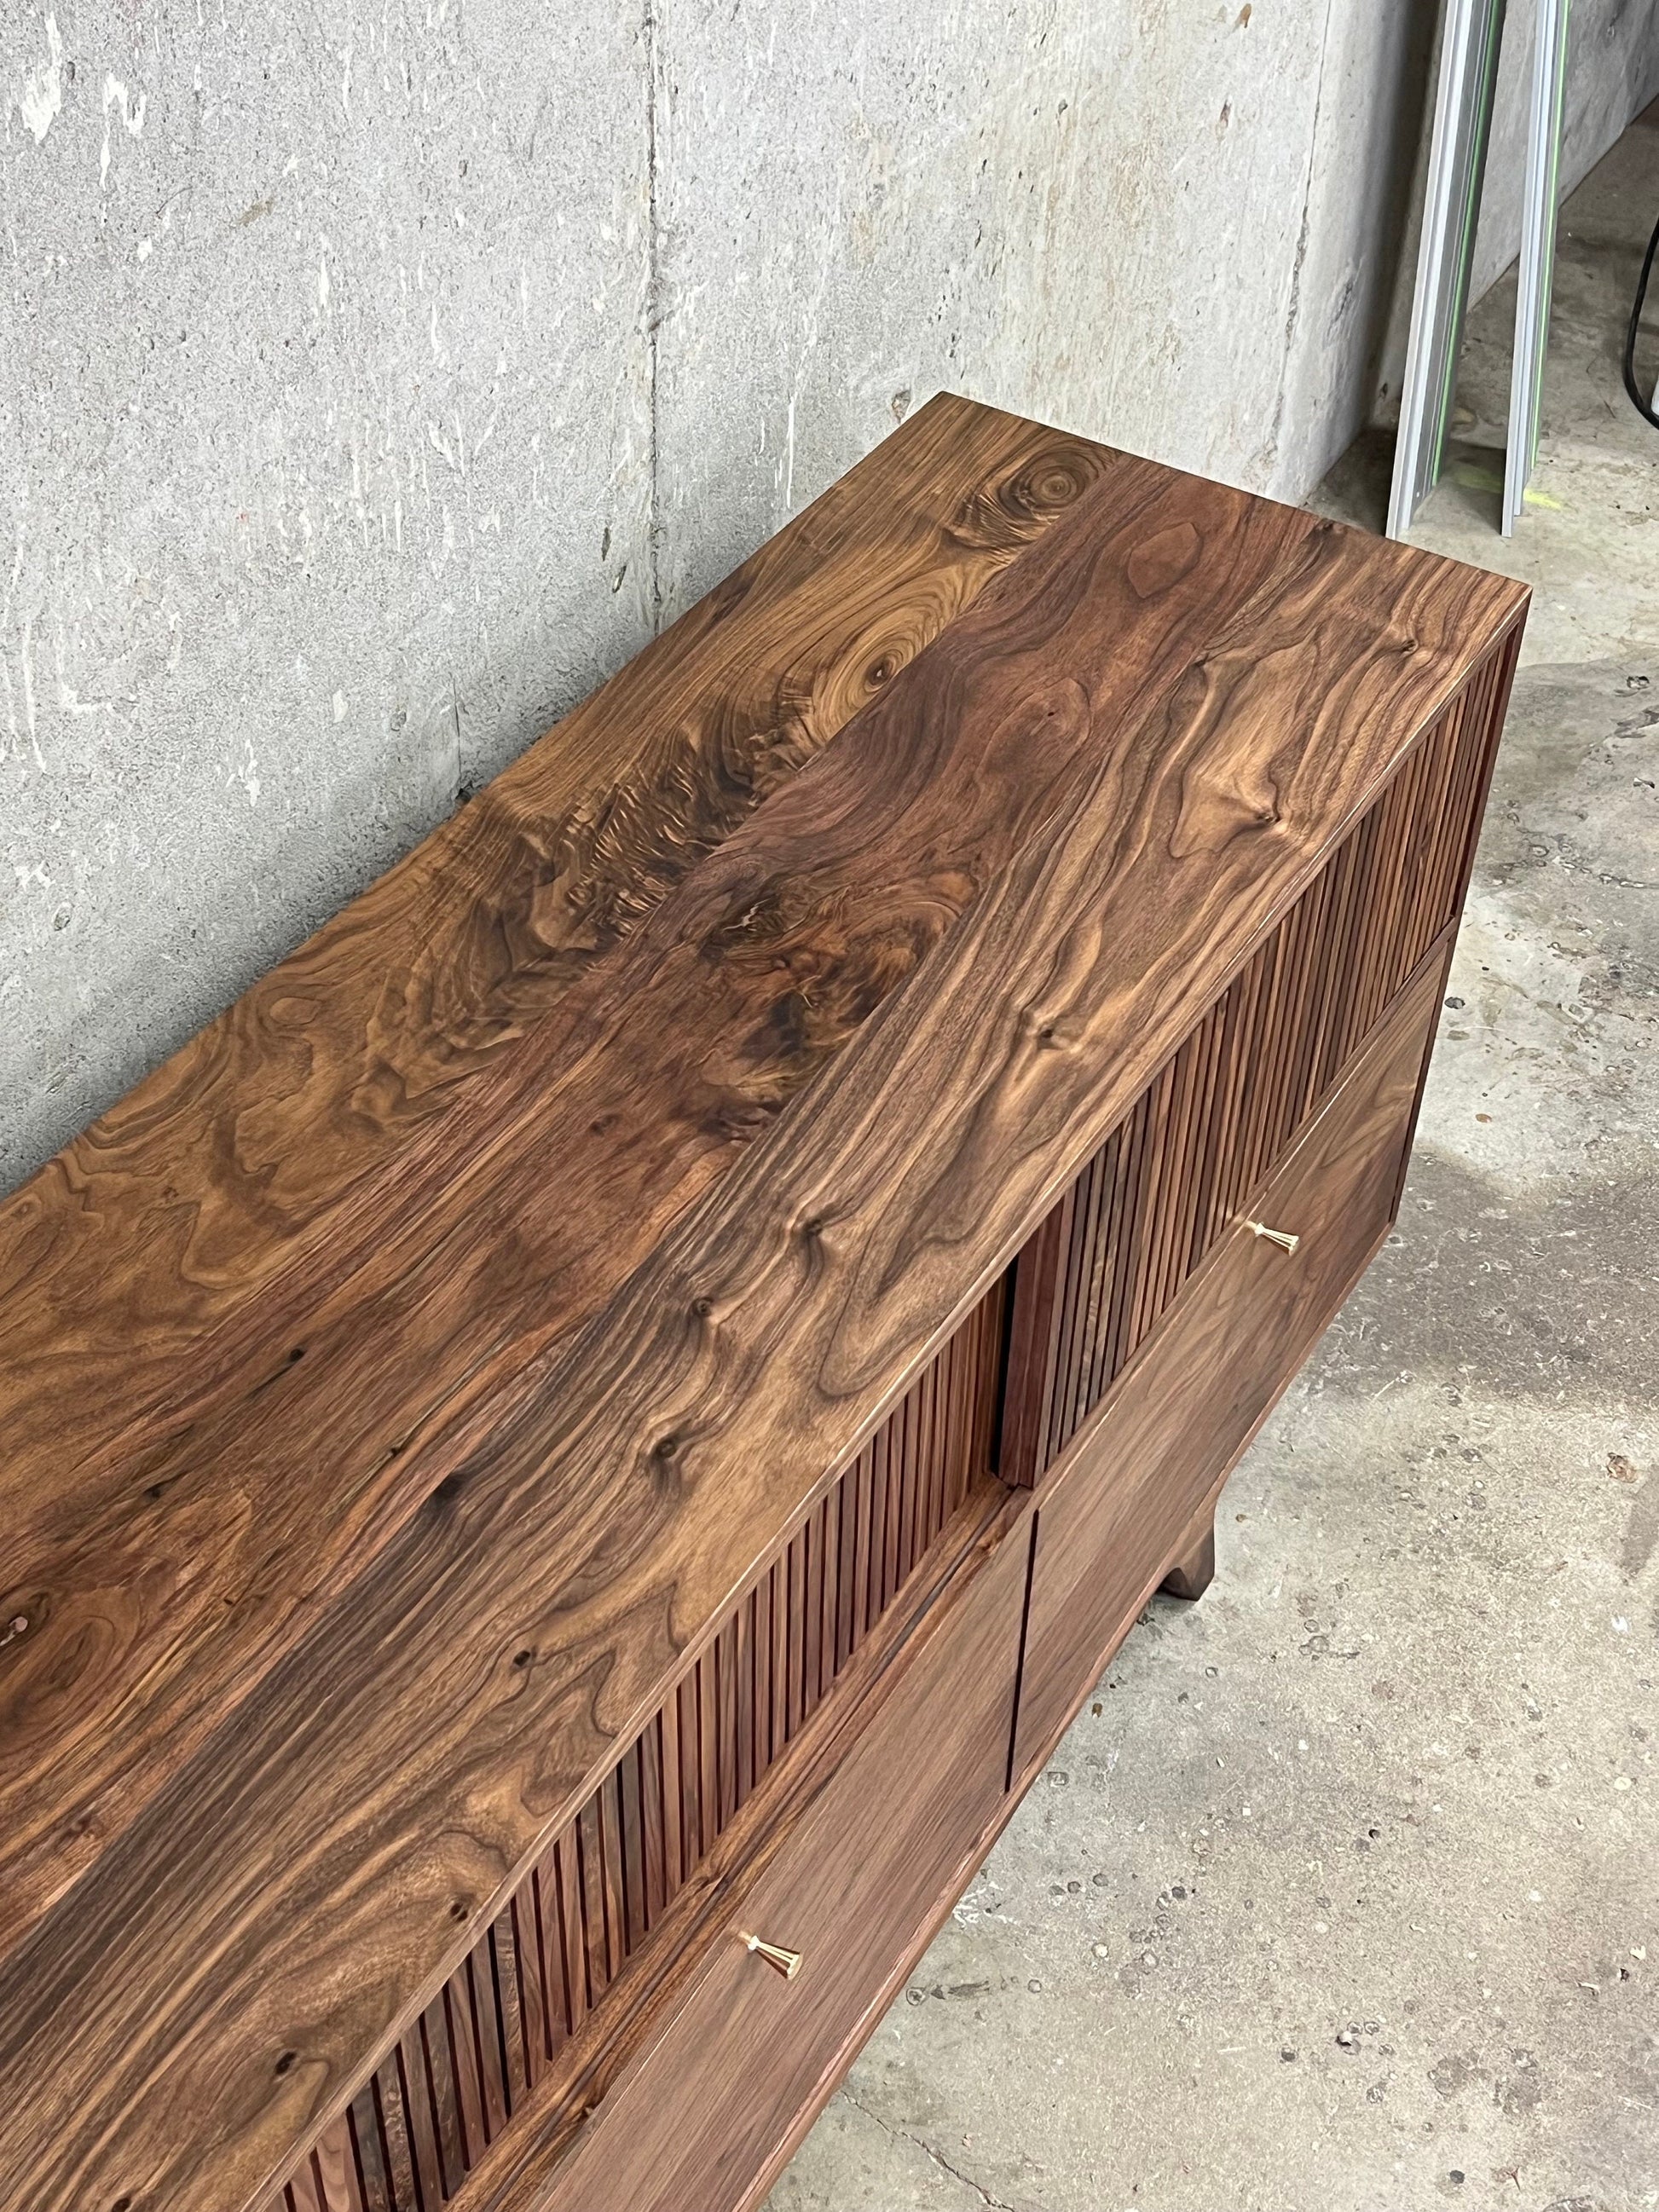 Figured and curly walnut wood grain orientation for the top of a media cabinet. The angle of the photo shows the slat texture, drawers, and brass pulls from above. 